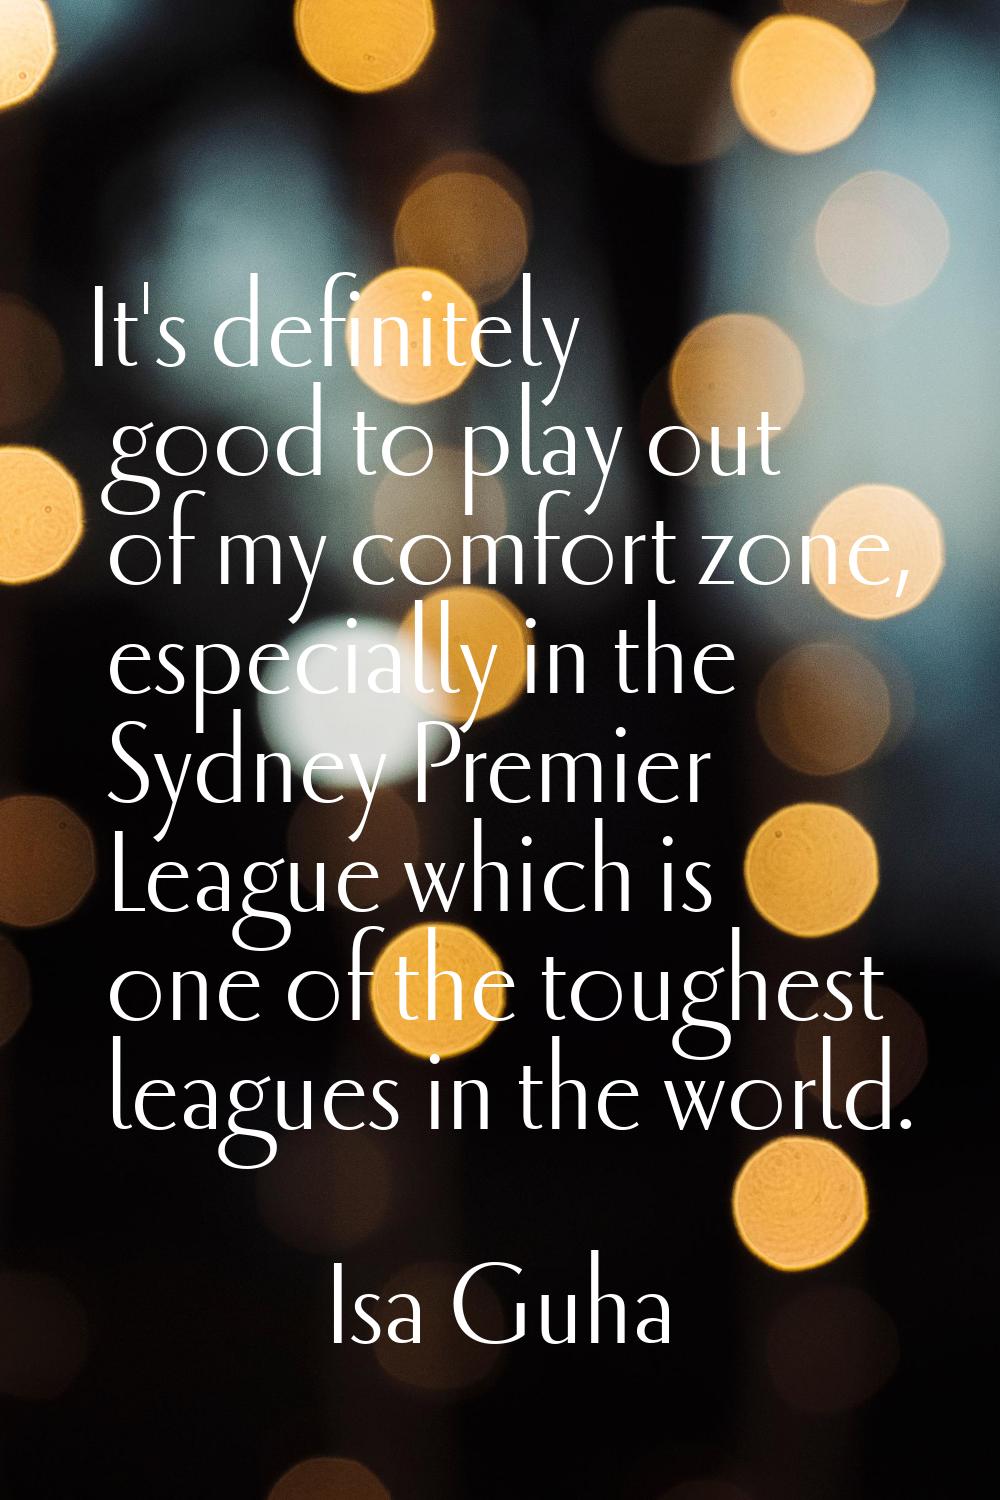 It's definitely good to play out of my comfort zone, especially in the Sydney Premier League which 